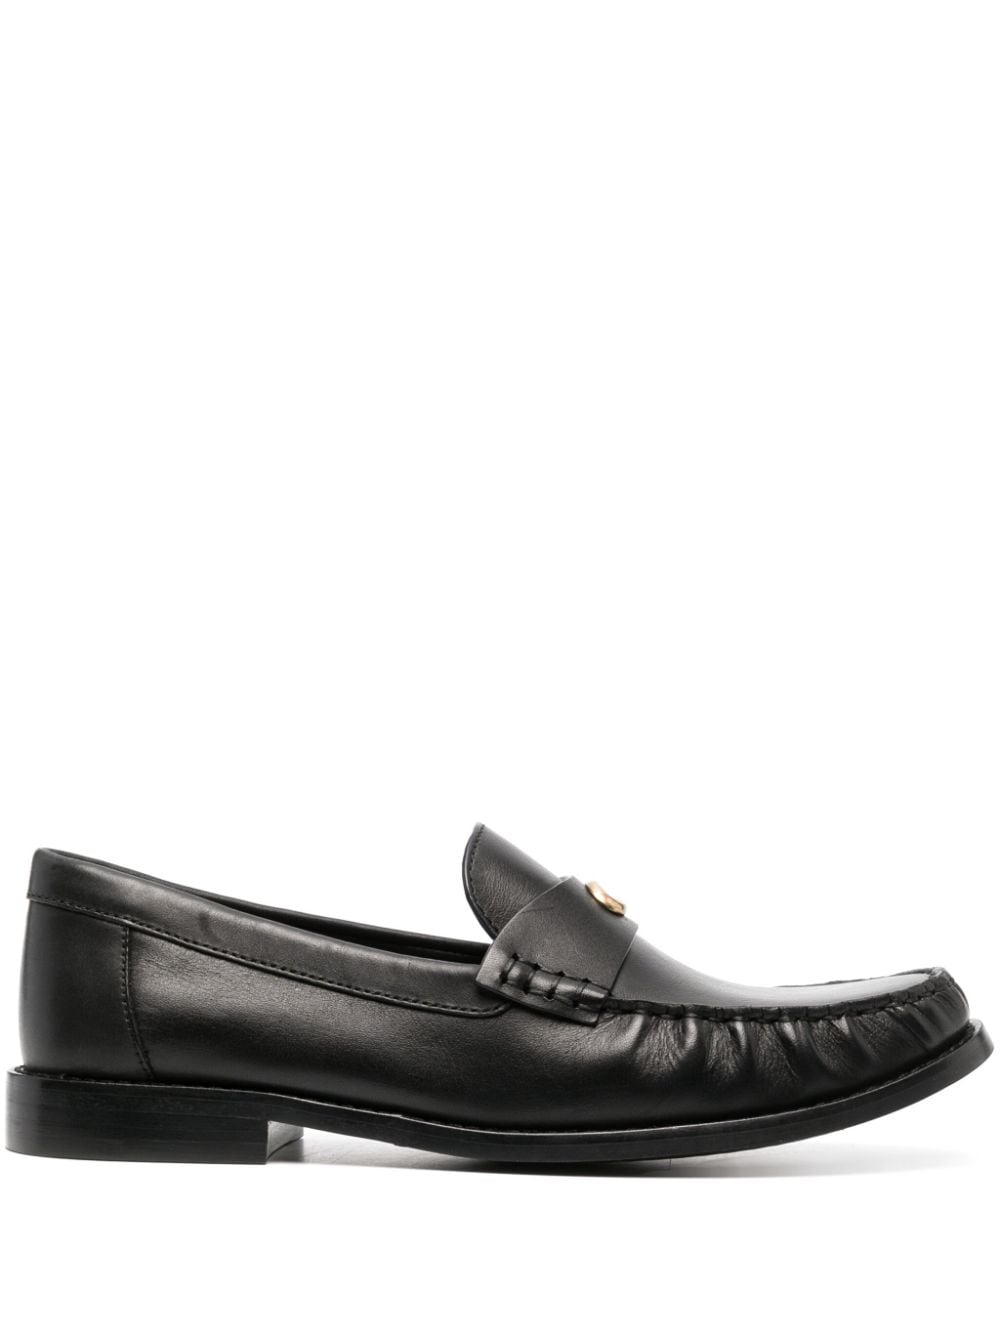 Image 1 of Coach logo-plaque leather loafers